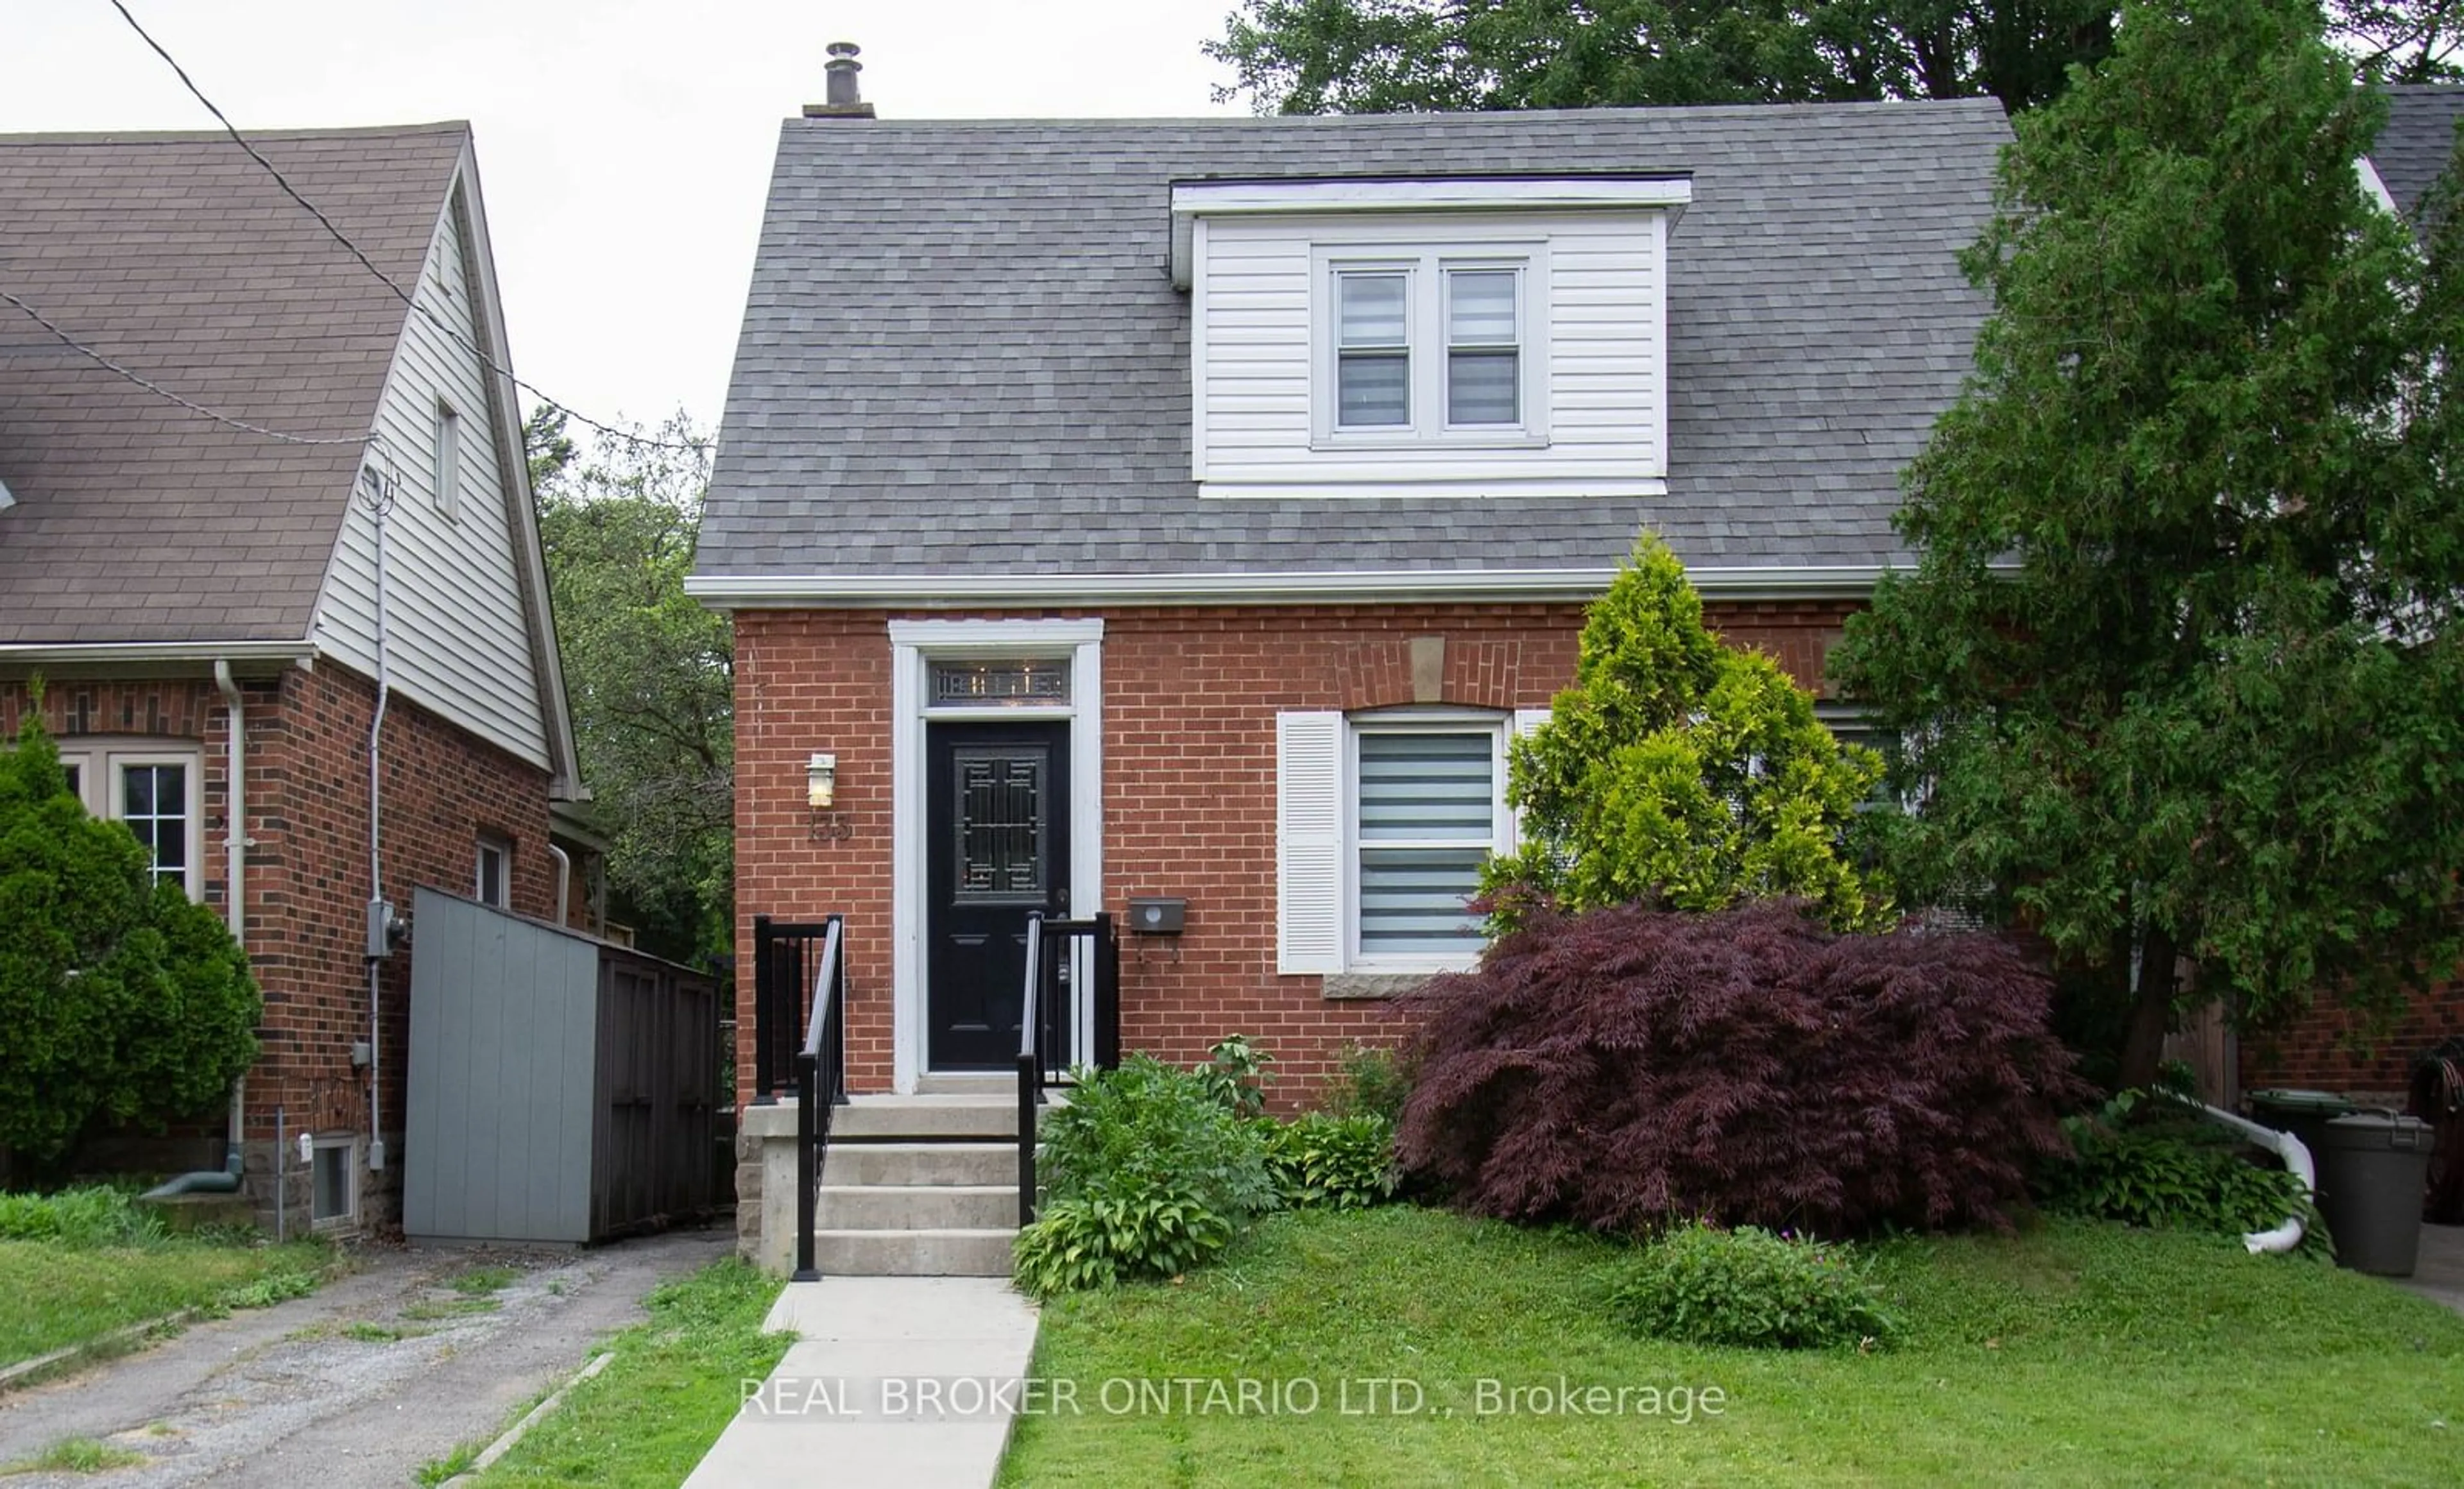 Home with brick exterior material for 133 Bond St, Hamilton Ontario L8S 3W4